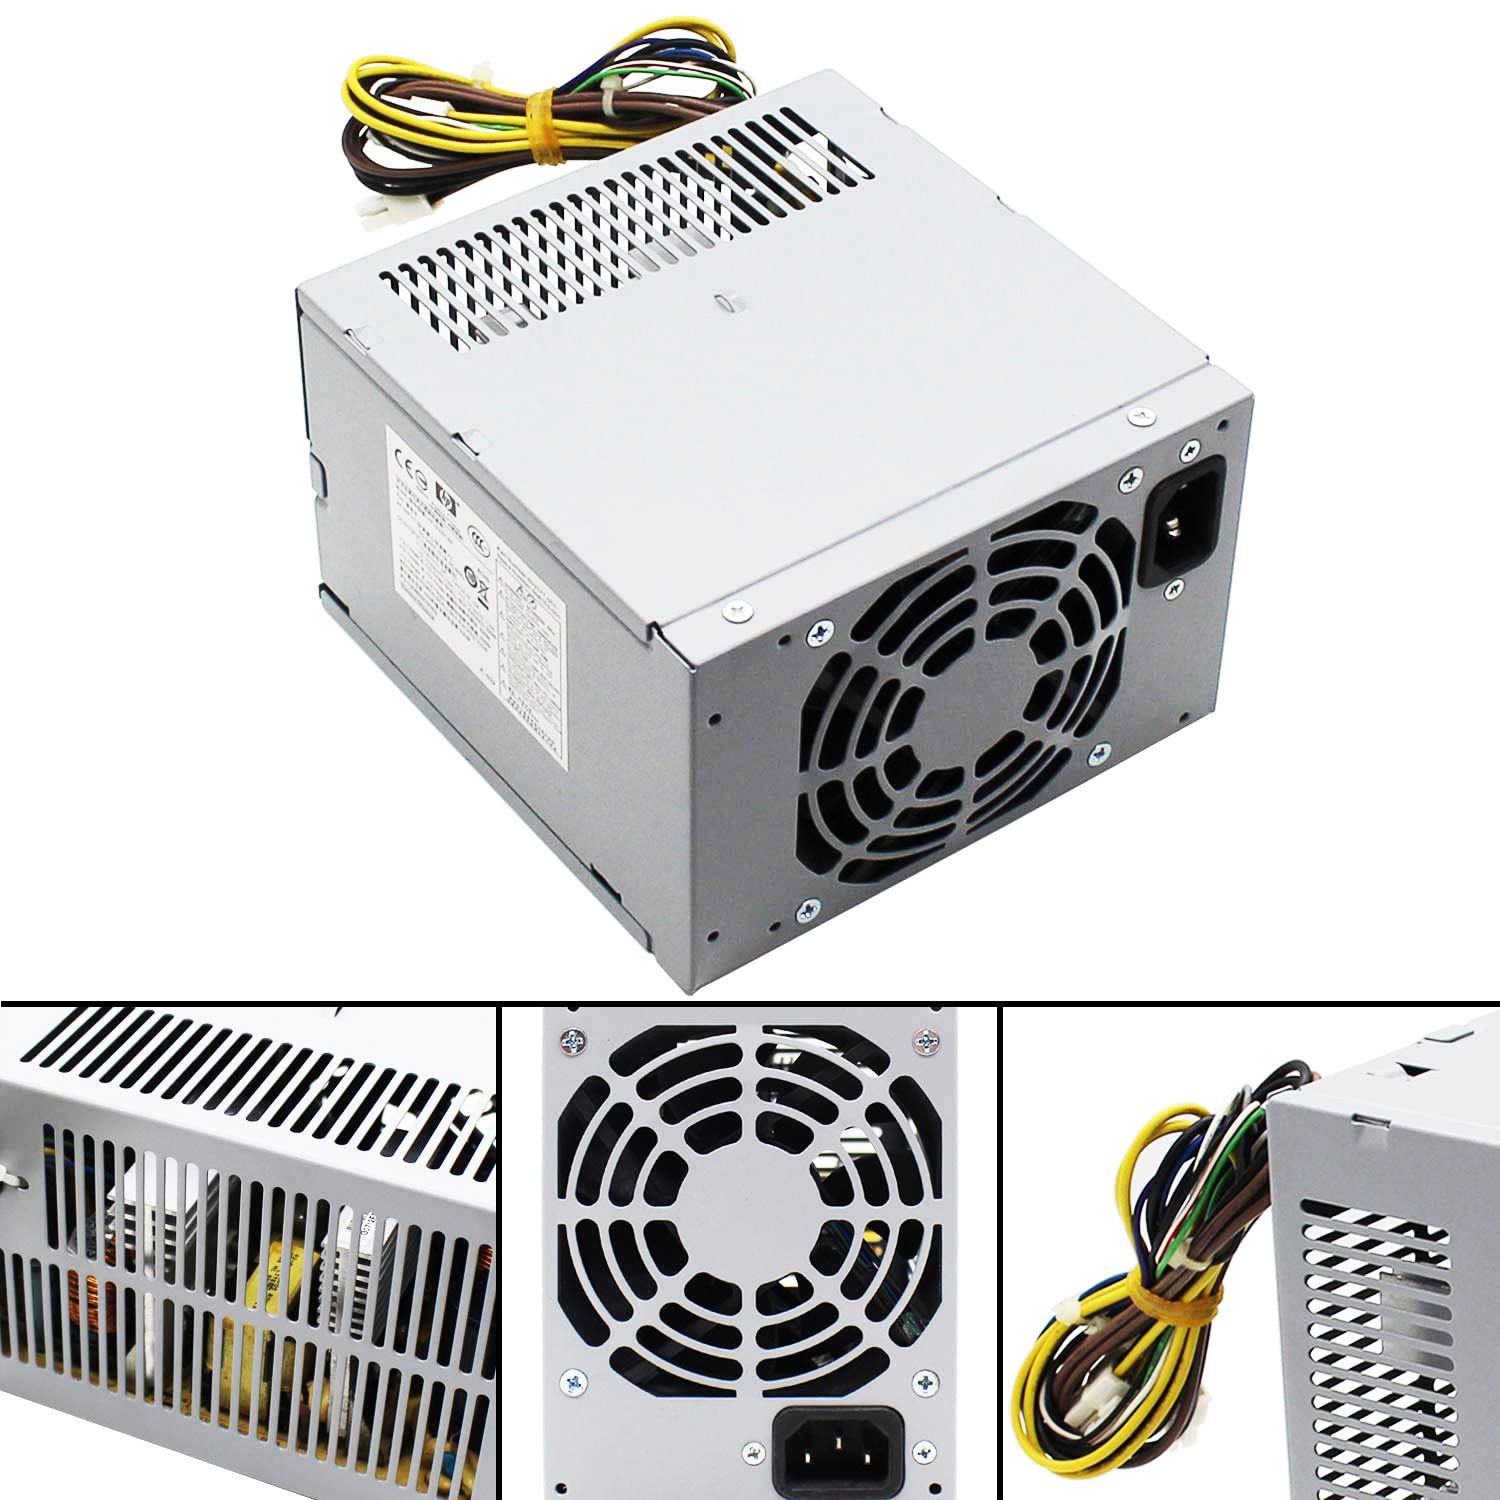 YEECHUN 320W D10-320P2A New Replacement Power Supply for HP MT 6000 6200 6300 8000 8200 Z200 CFH-0320EWWA DPS-320NB Compatible with Part Numbers 503377-001 611484-001 613764-001 613765-001 Series